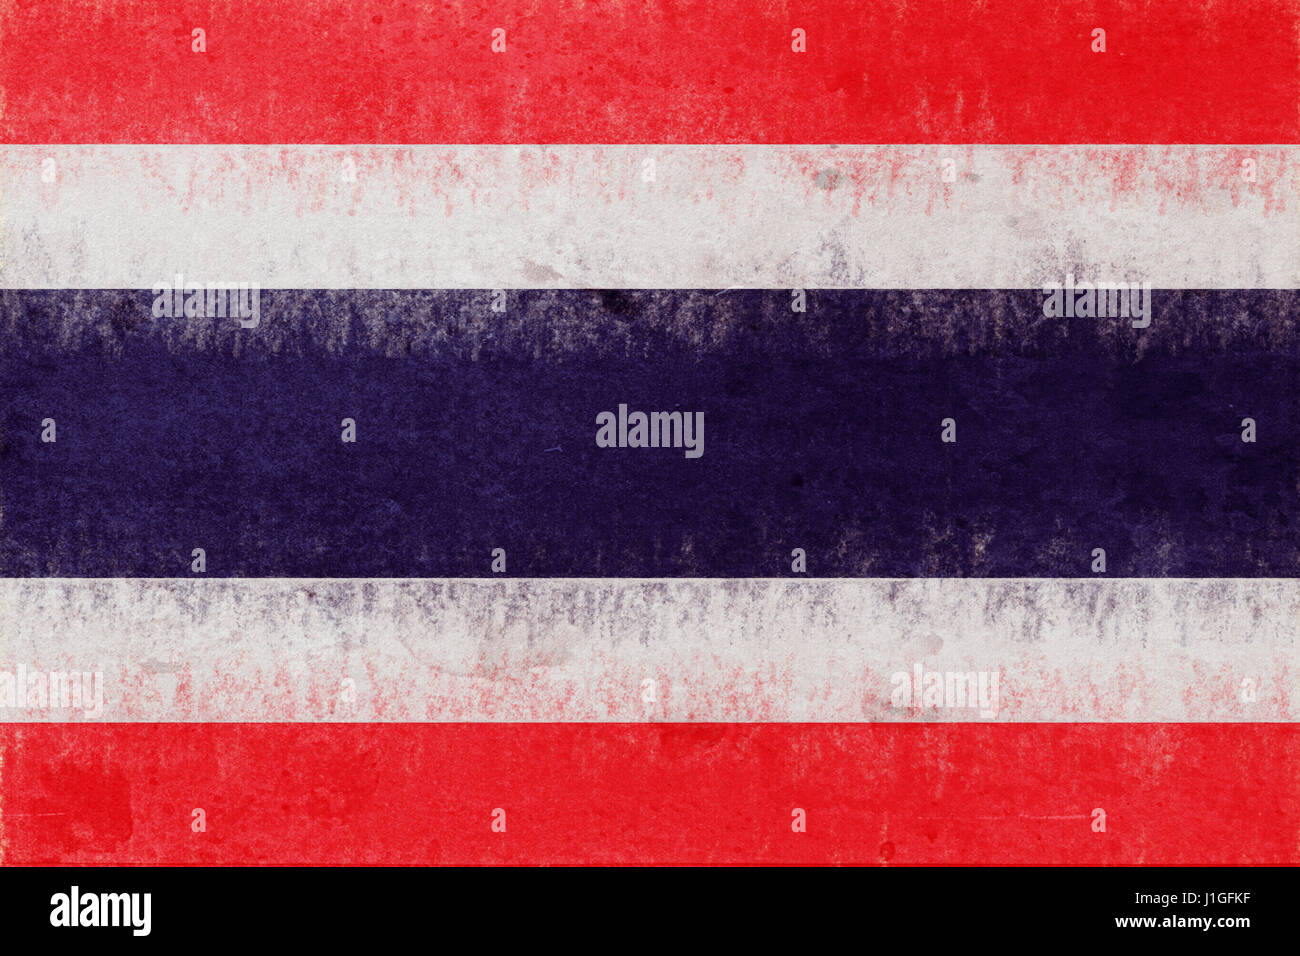 Illustration of the flag of Thailand with a grunge look. Stock Photo